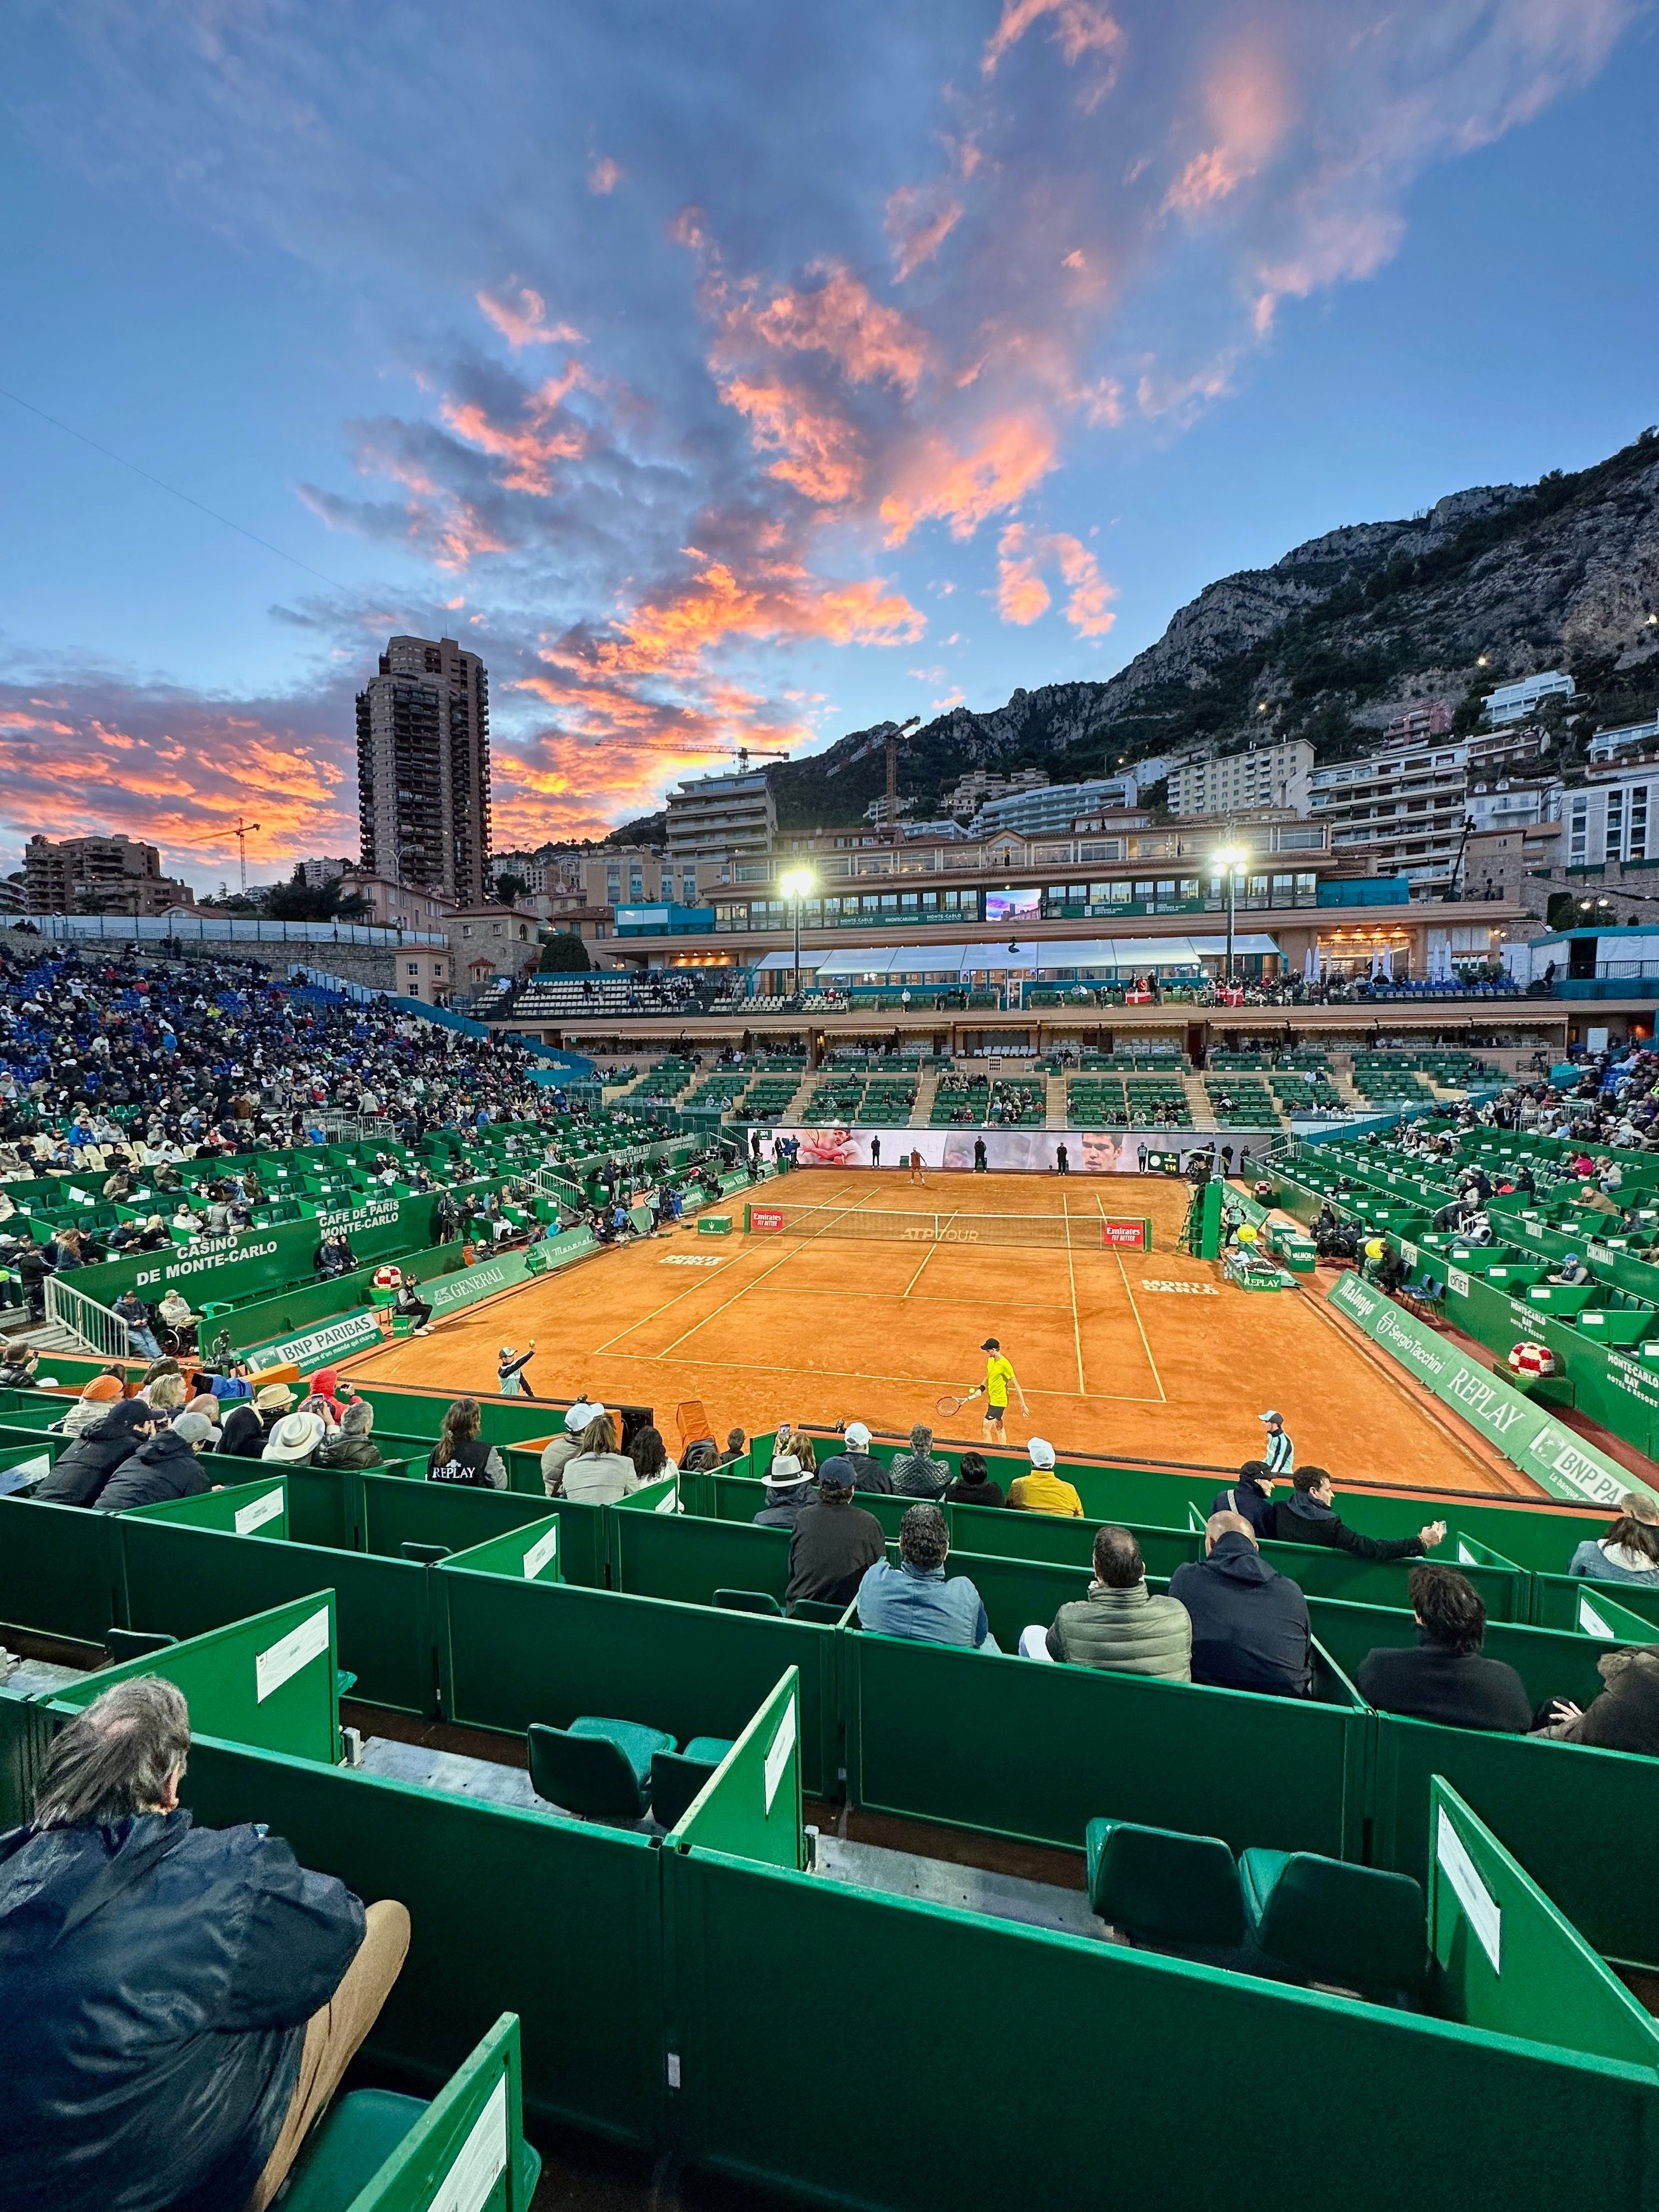 Tennis League Network Blog Eric and Brian Dosal Once in a Lifetime Experience at Monte Carlo Masters 1000